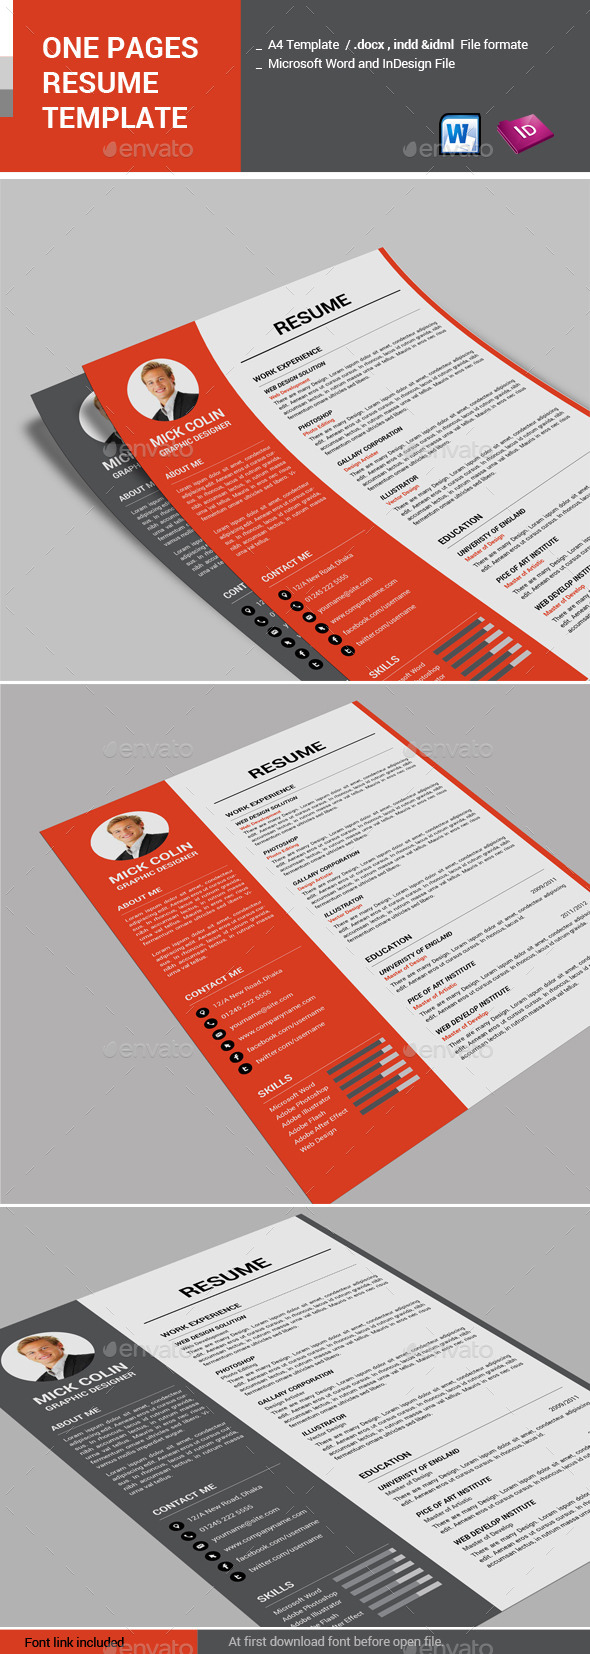 One Pages Resume Template